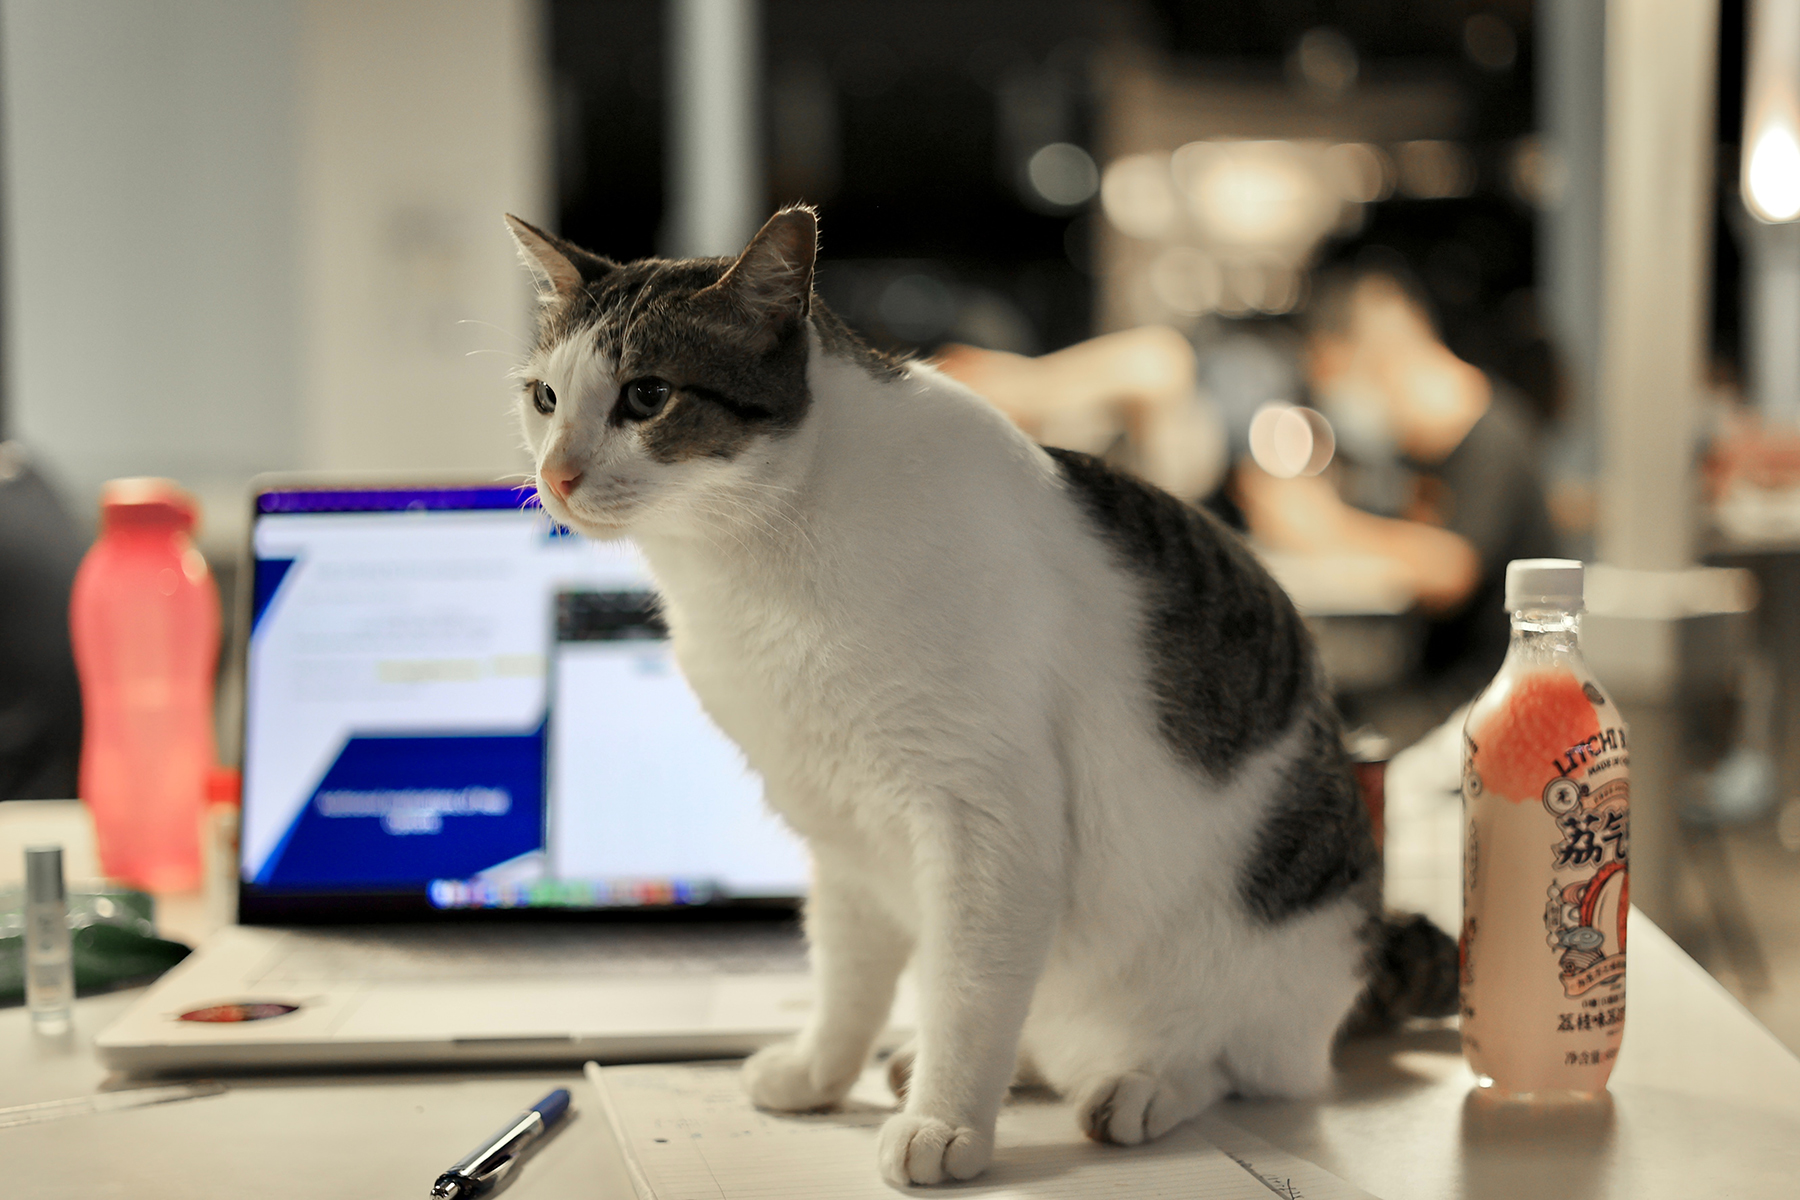 A cat sitting on a desk in front of a laptop